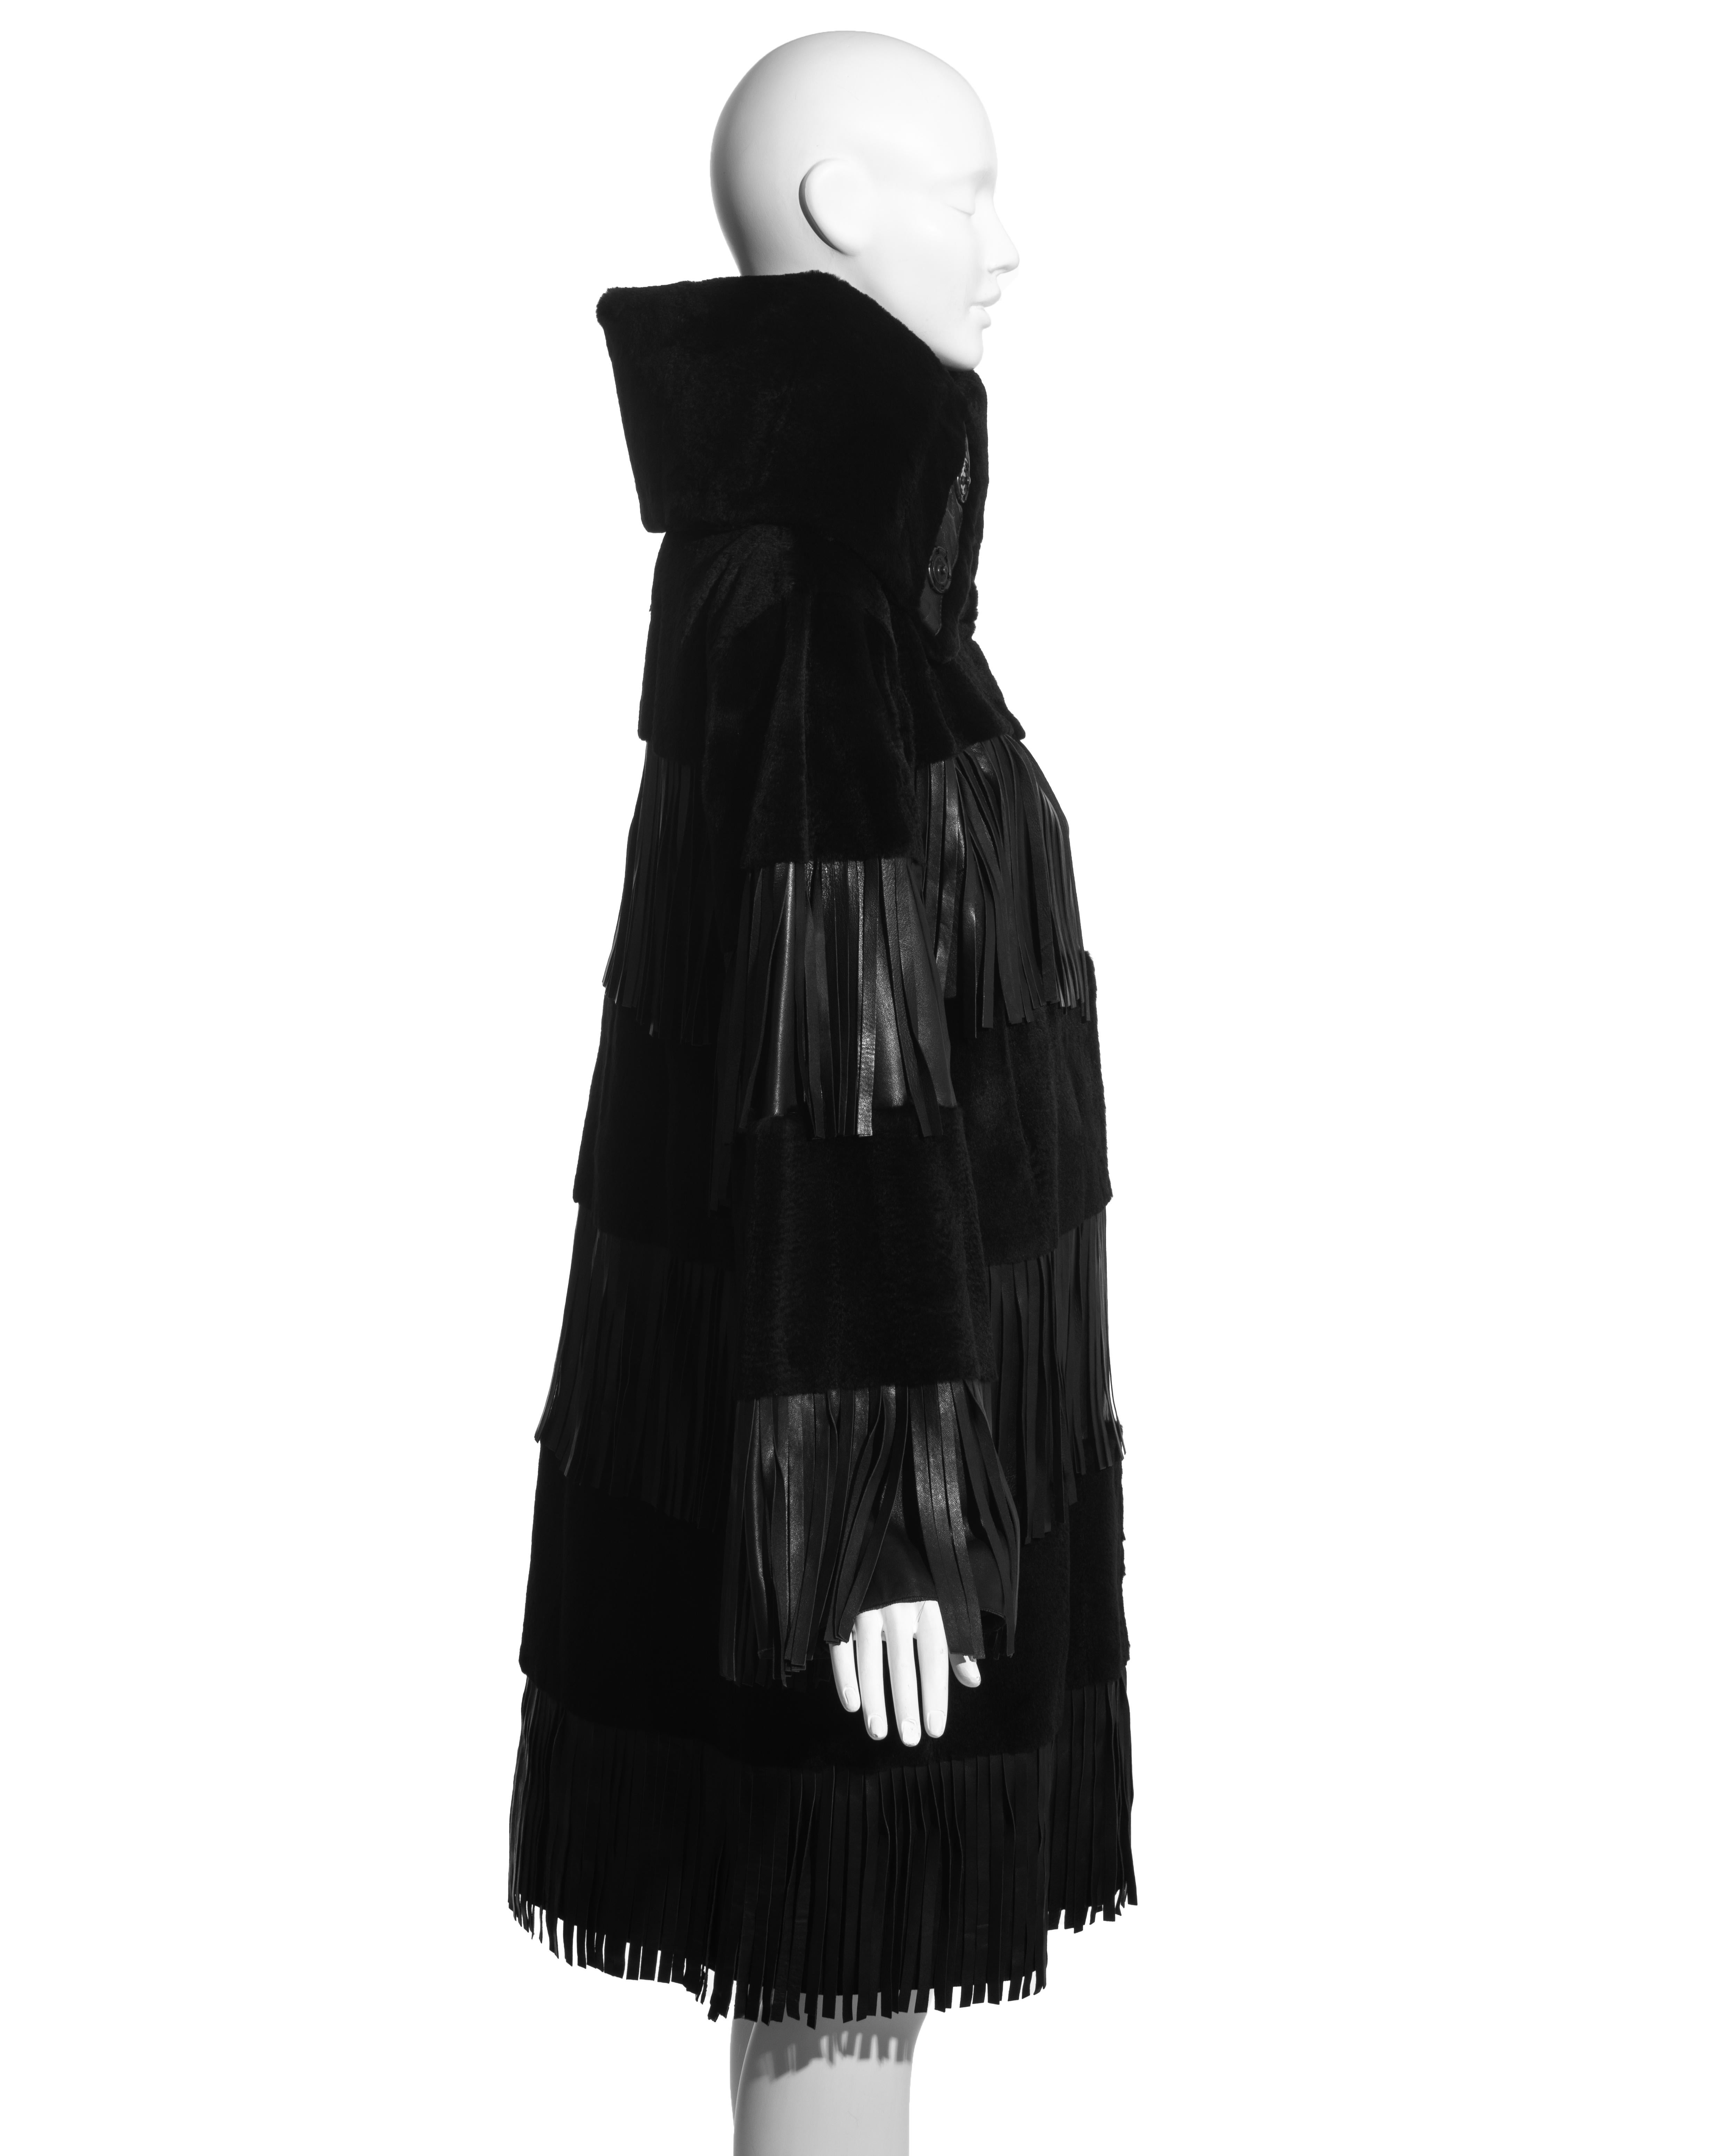 Dolce & Gabbana black fur and leather fringed coat, fw 2003 For Sale 1